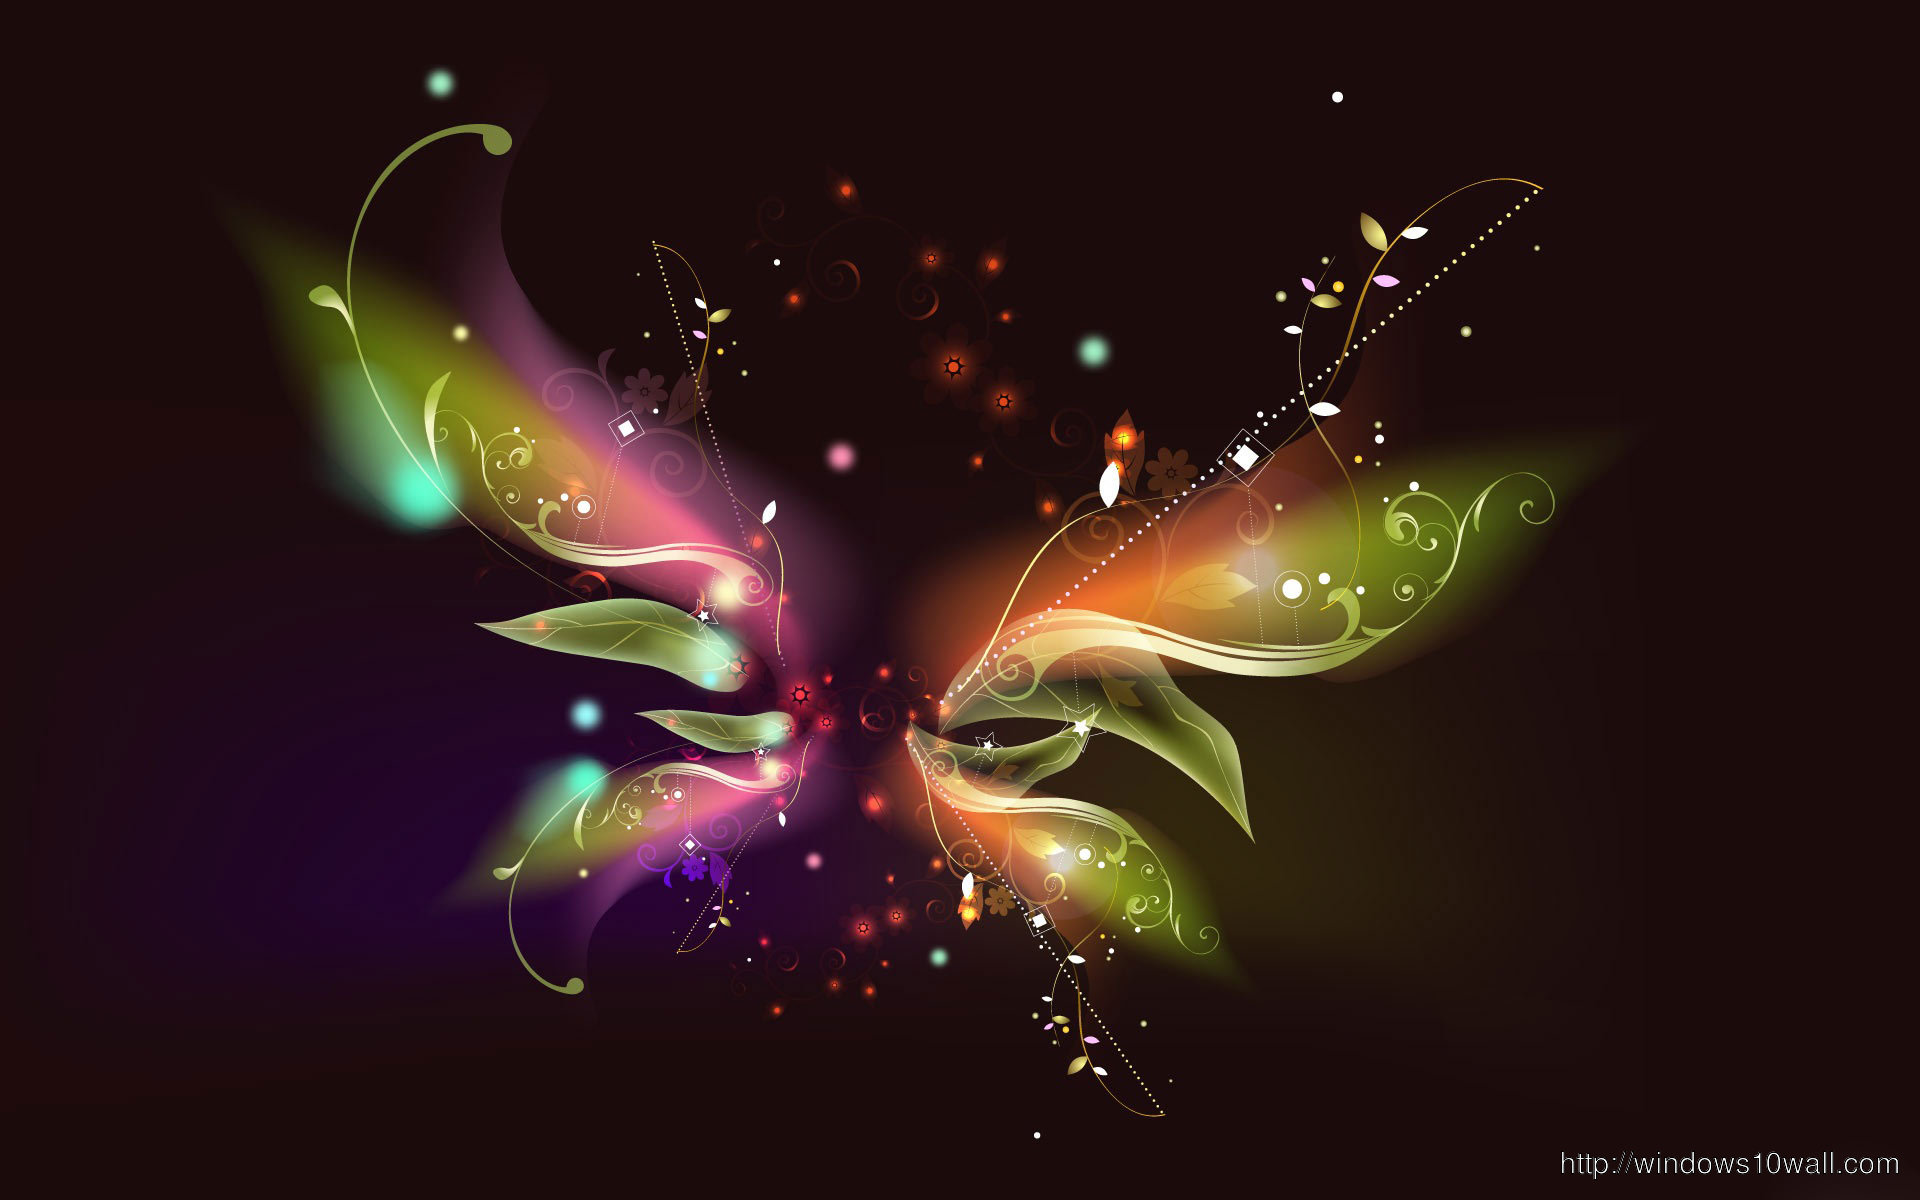 Awesome butterfly background pic